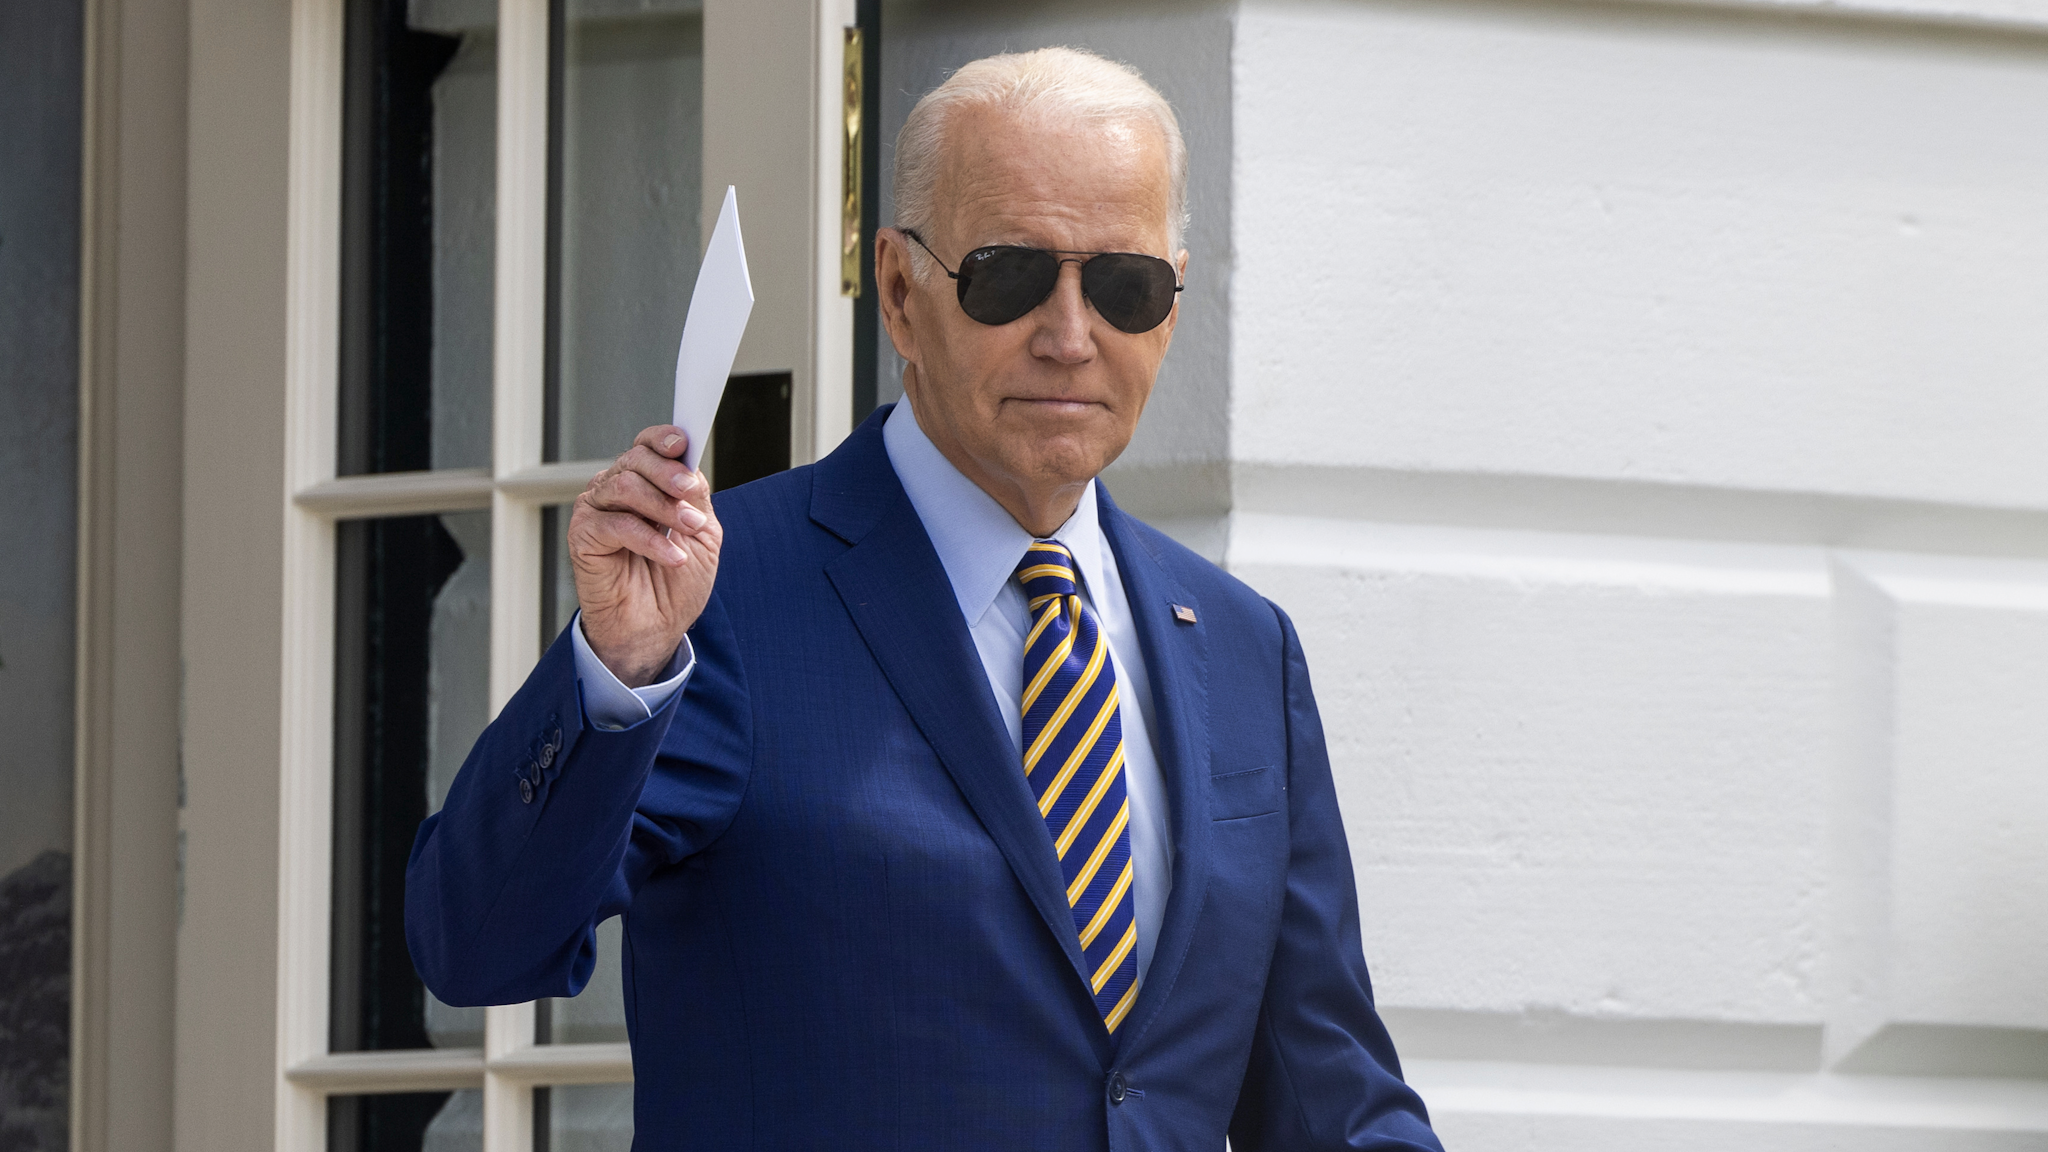 US President Joe Biden exits the White House before boarding Marine One in Washington, DC, US, on Thursday, July 6, 2023. Biden will announce a $60 million investment from Enphase Energy Inc., a manufacturer of solar-energy equipment, when he travels today to South Carolina, the latest effort to underscore his administration's economic agenda as he seeks reelection.